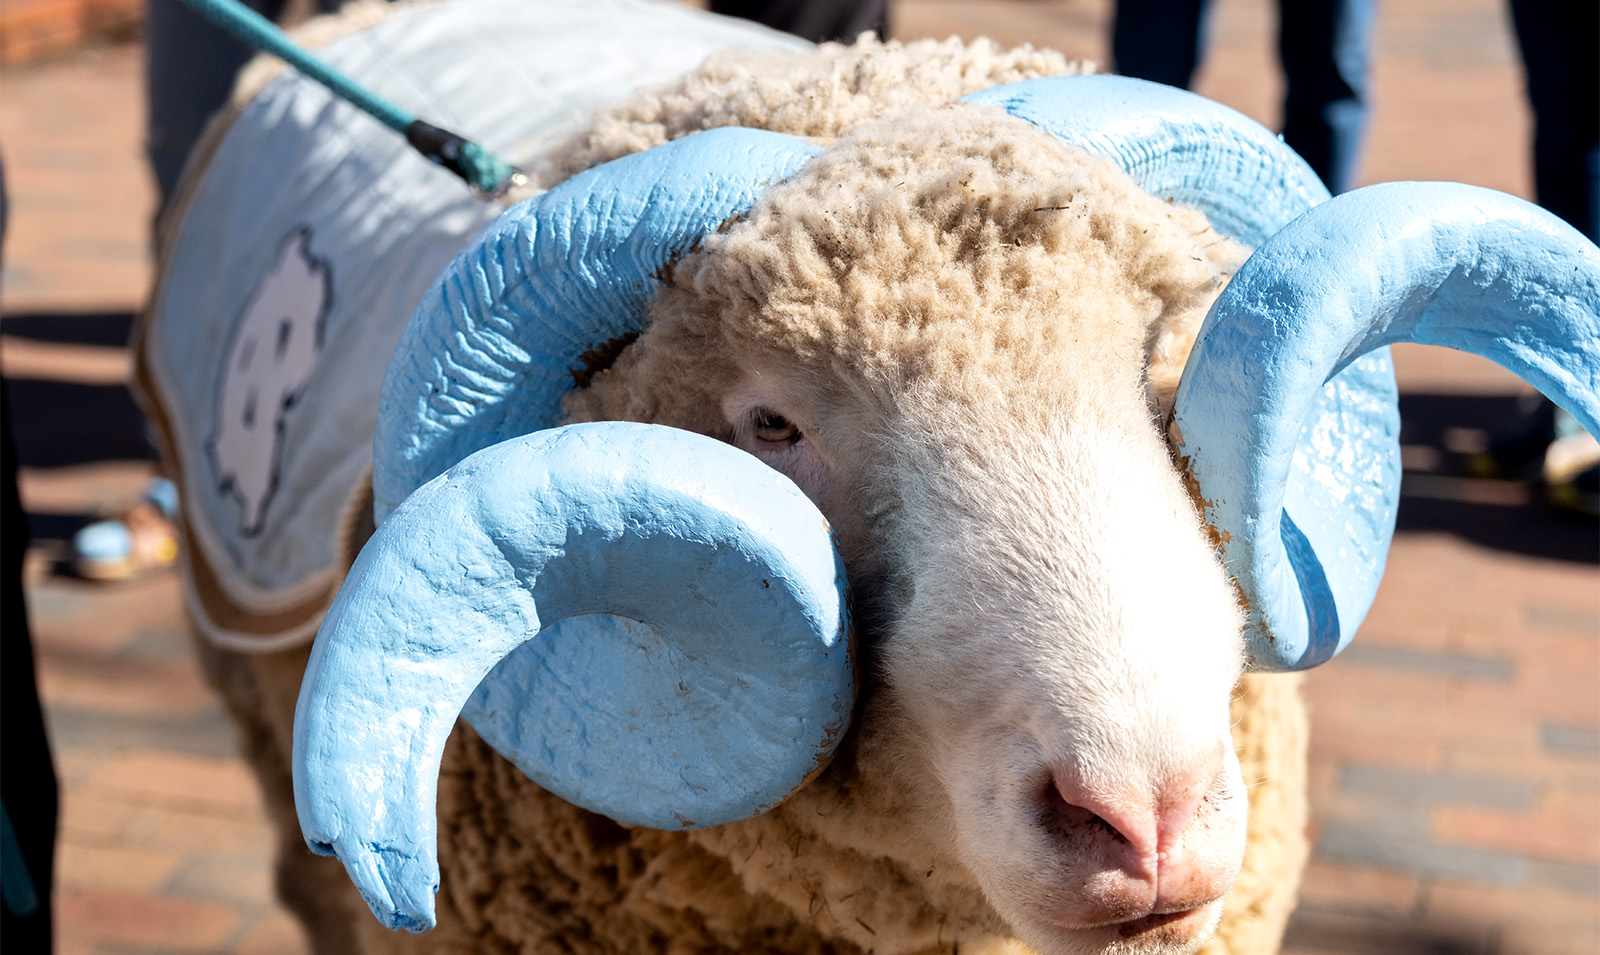 Close-up image of a live ram mascot, Rameses, on the campus of UNC-Chapel Hill.